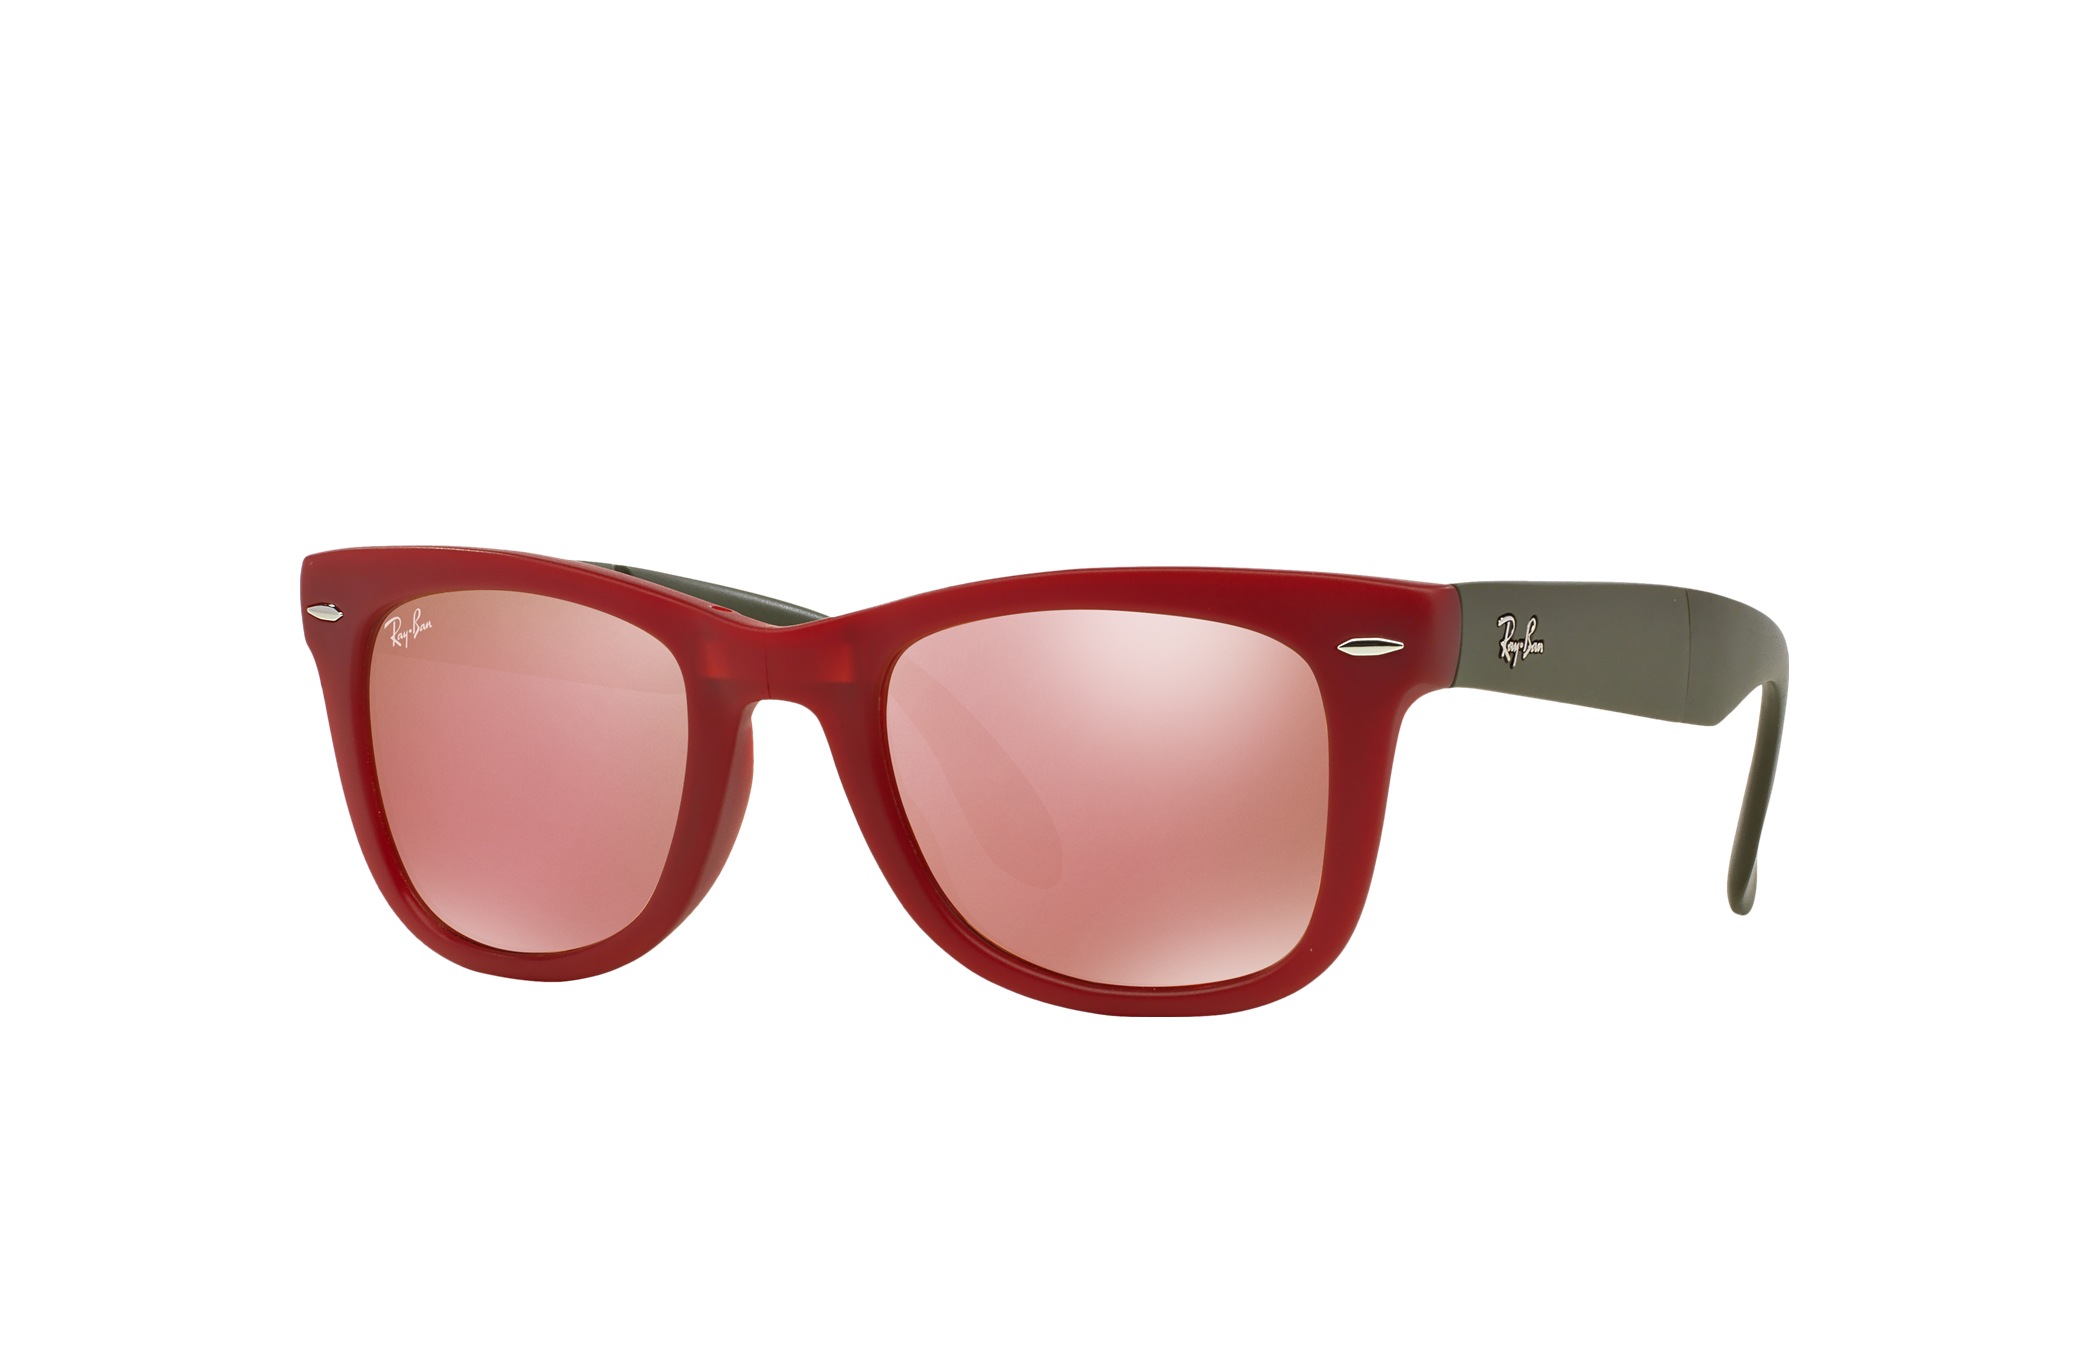 Wayfarer Folding Flash Lenses Sunglasses in Red and Copper | Ray-Ban®